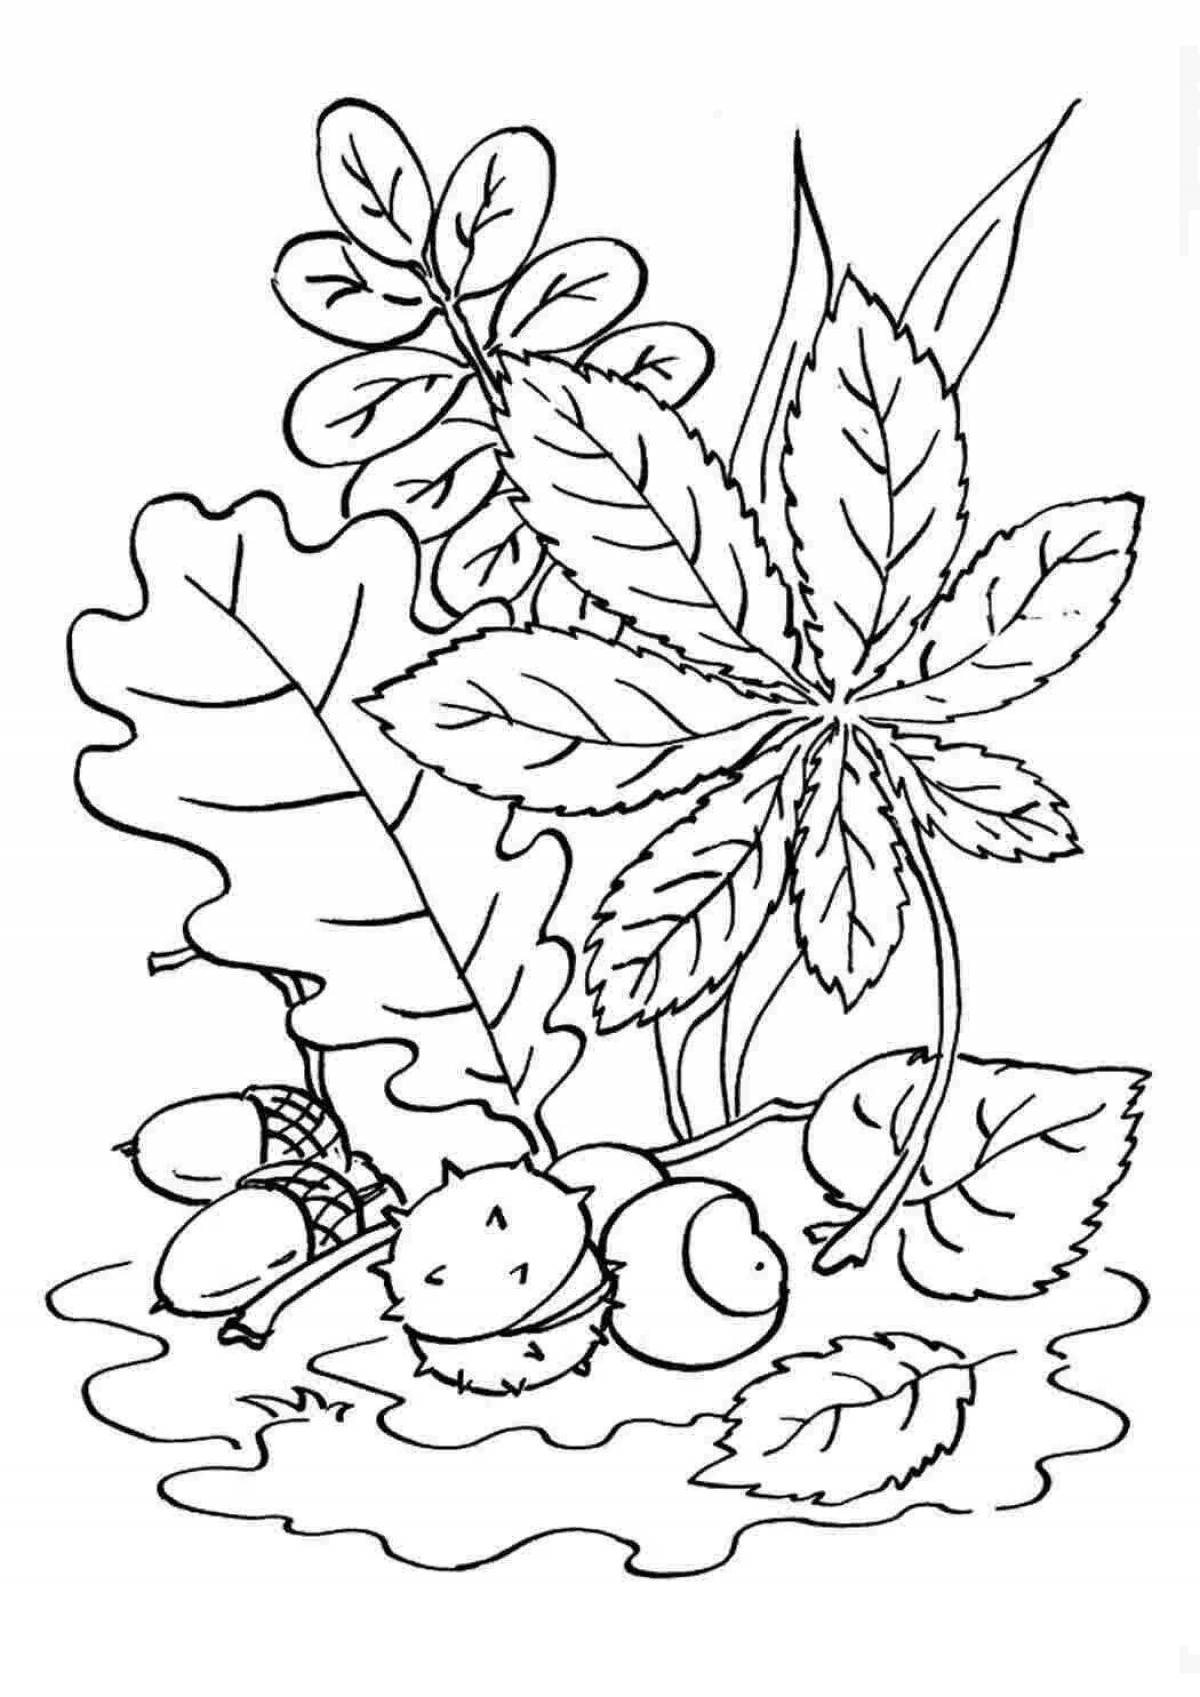 Exciting autumn coloring book for 3-4 year olds